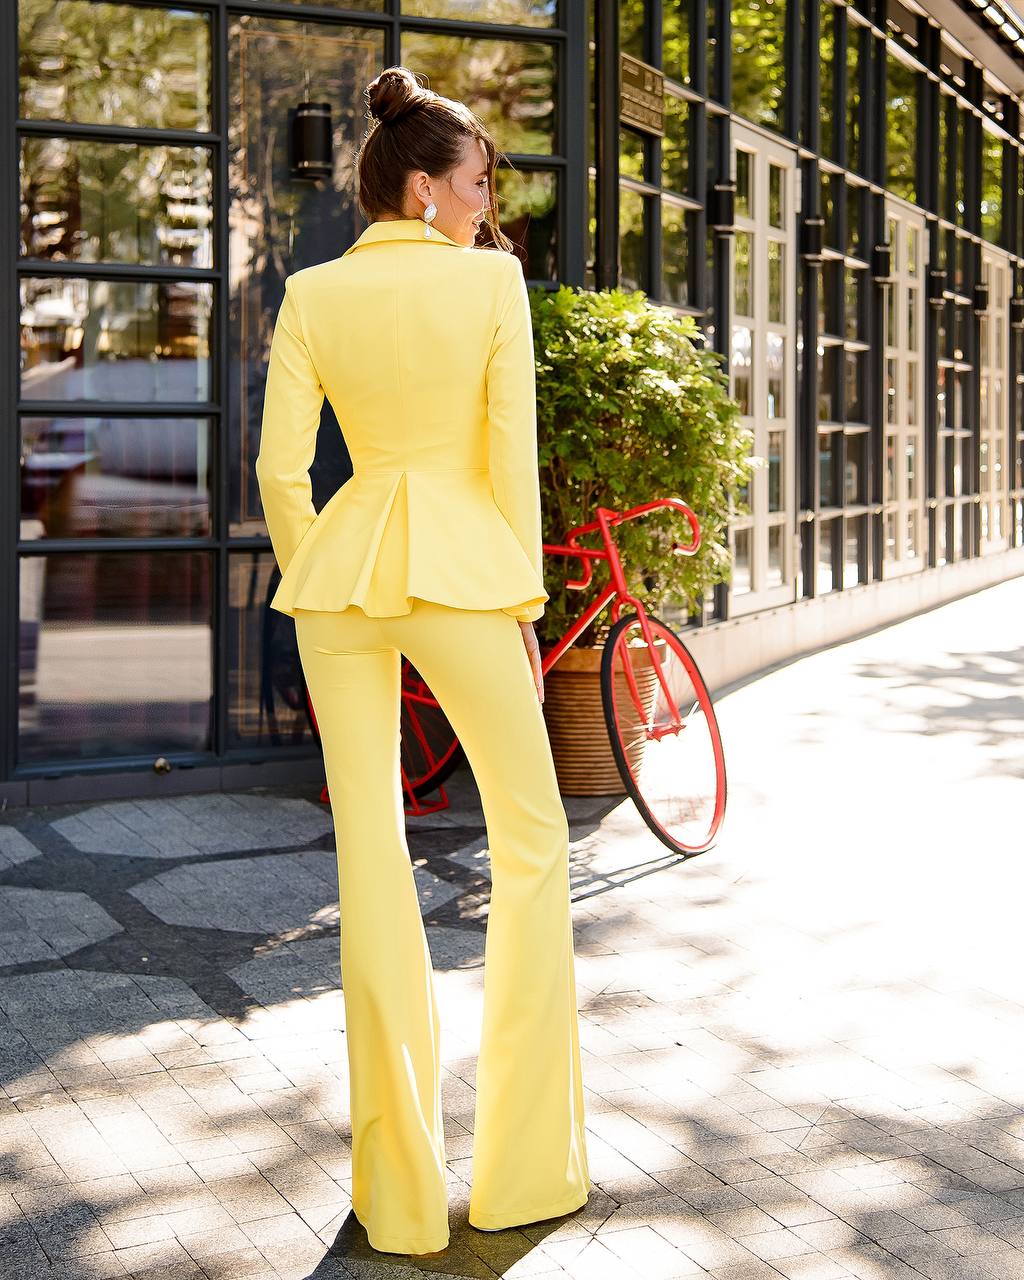 a woman in a yellow suit standing on a sidewalk